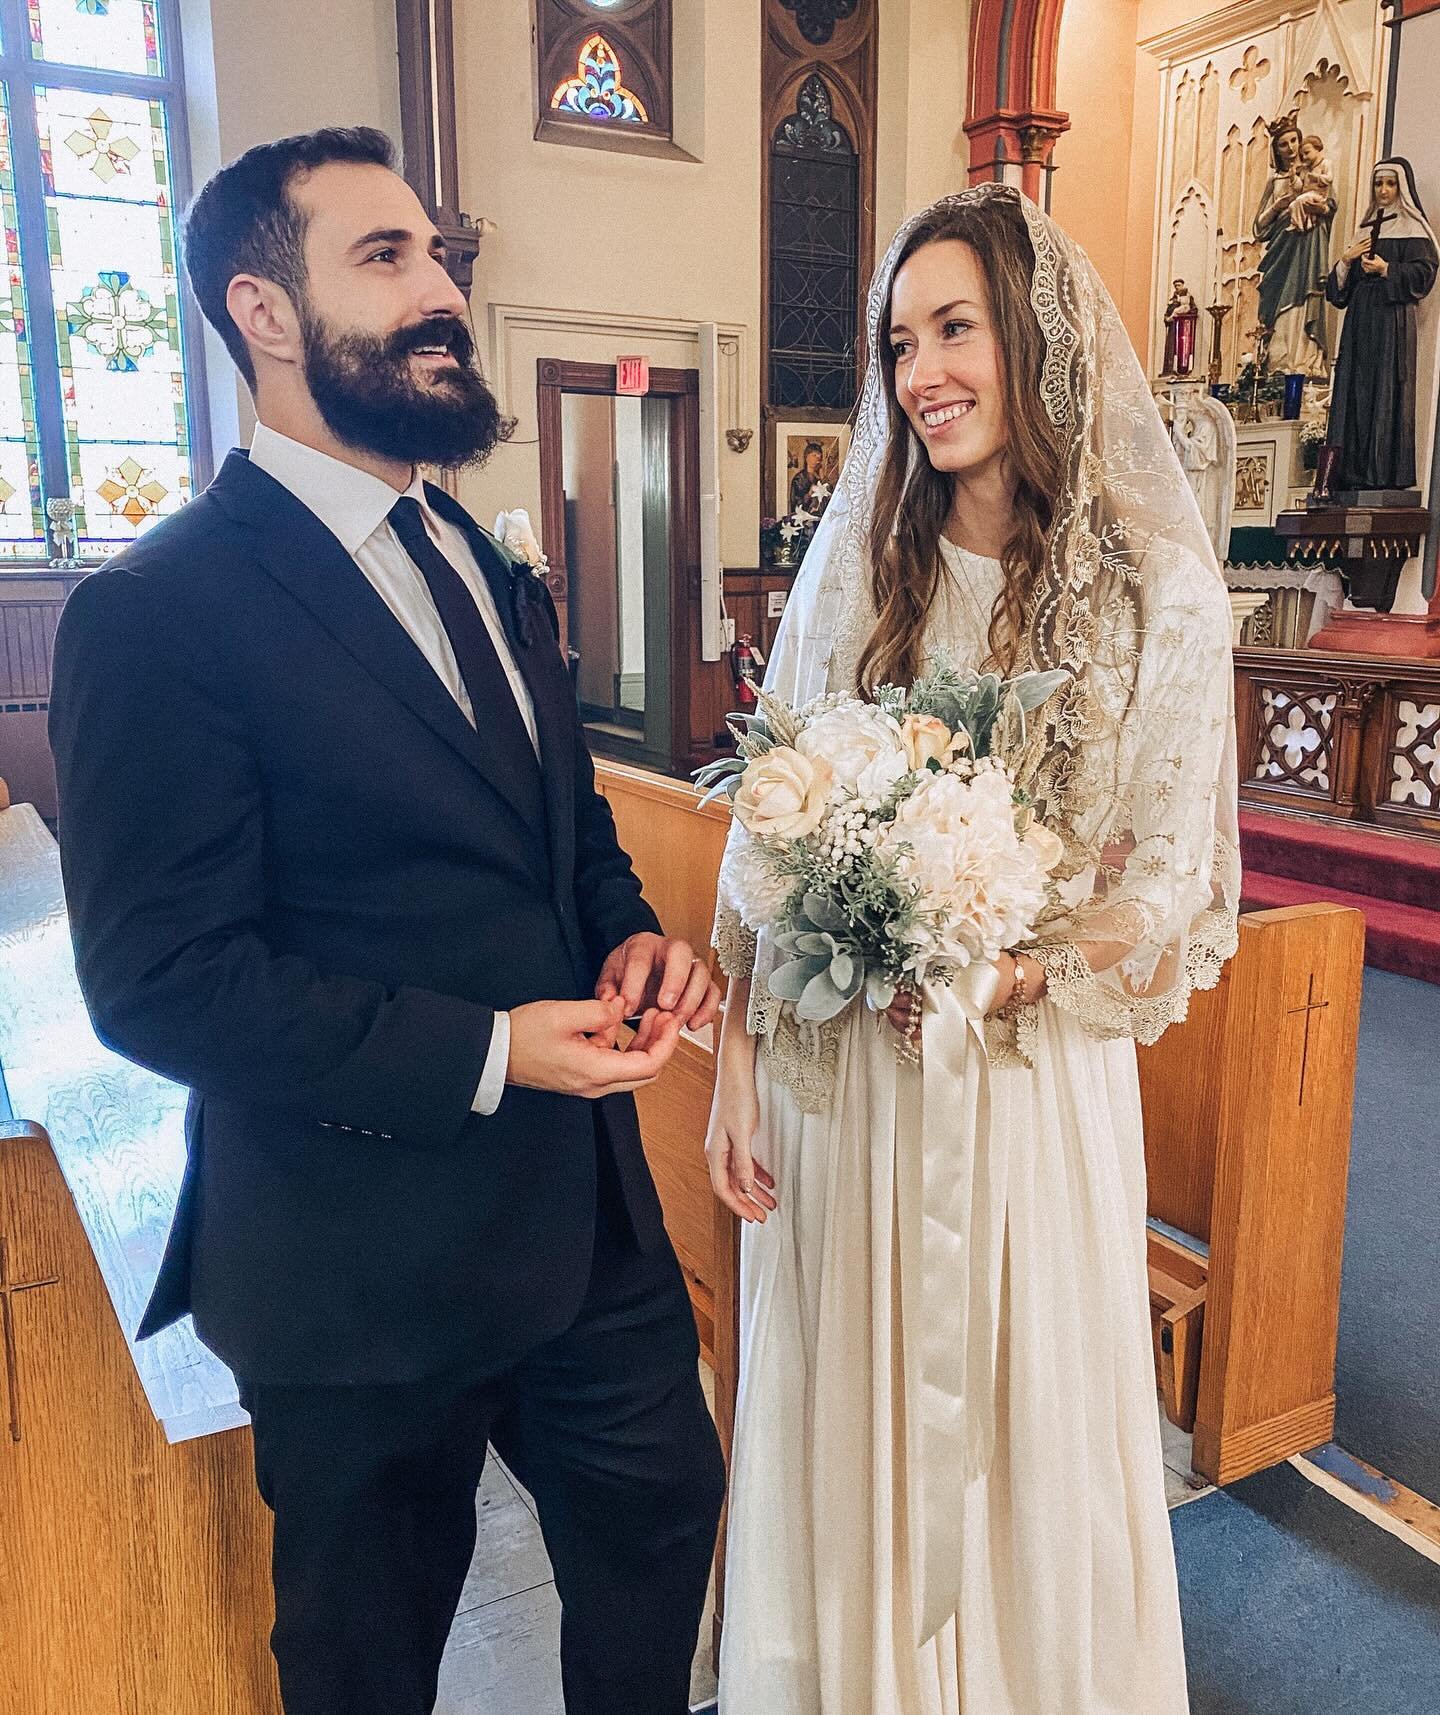 April 24 💛 Our wedding anniversary. The vocation of marriage is so beautiful. What a gift sacramental marriage is! 

May we always remember our mission as husband and wife and keep eternity on our minds 💛 

#livolsirosaries #catholicwedding #gladtr